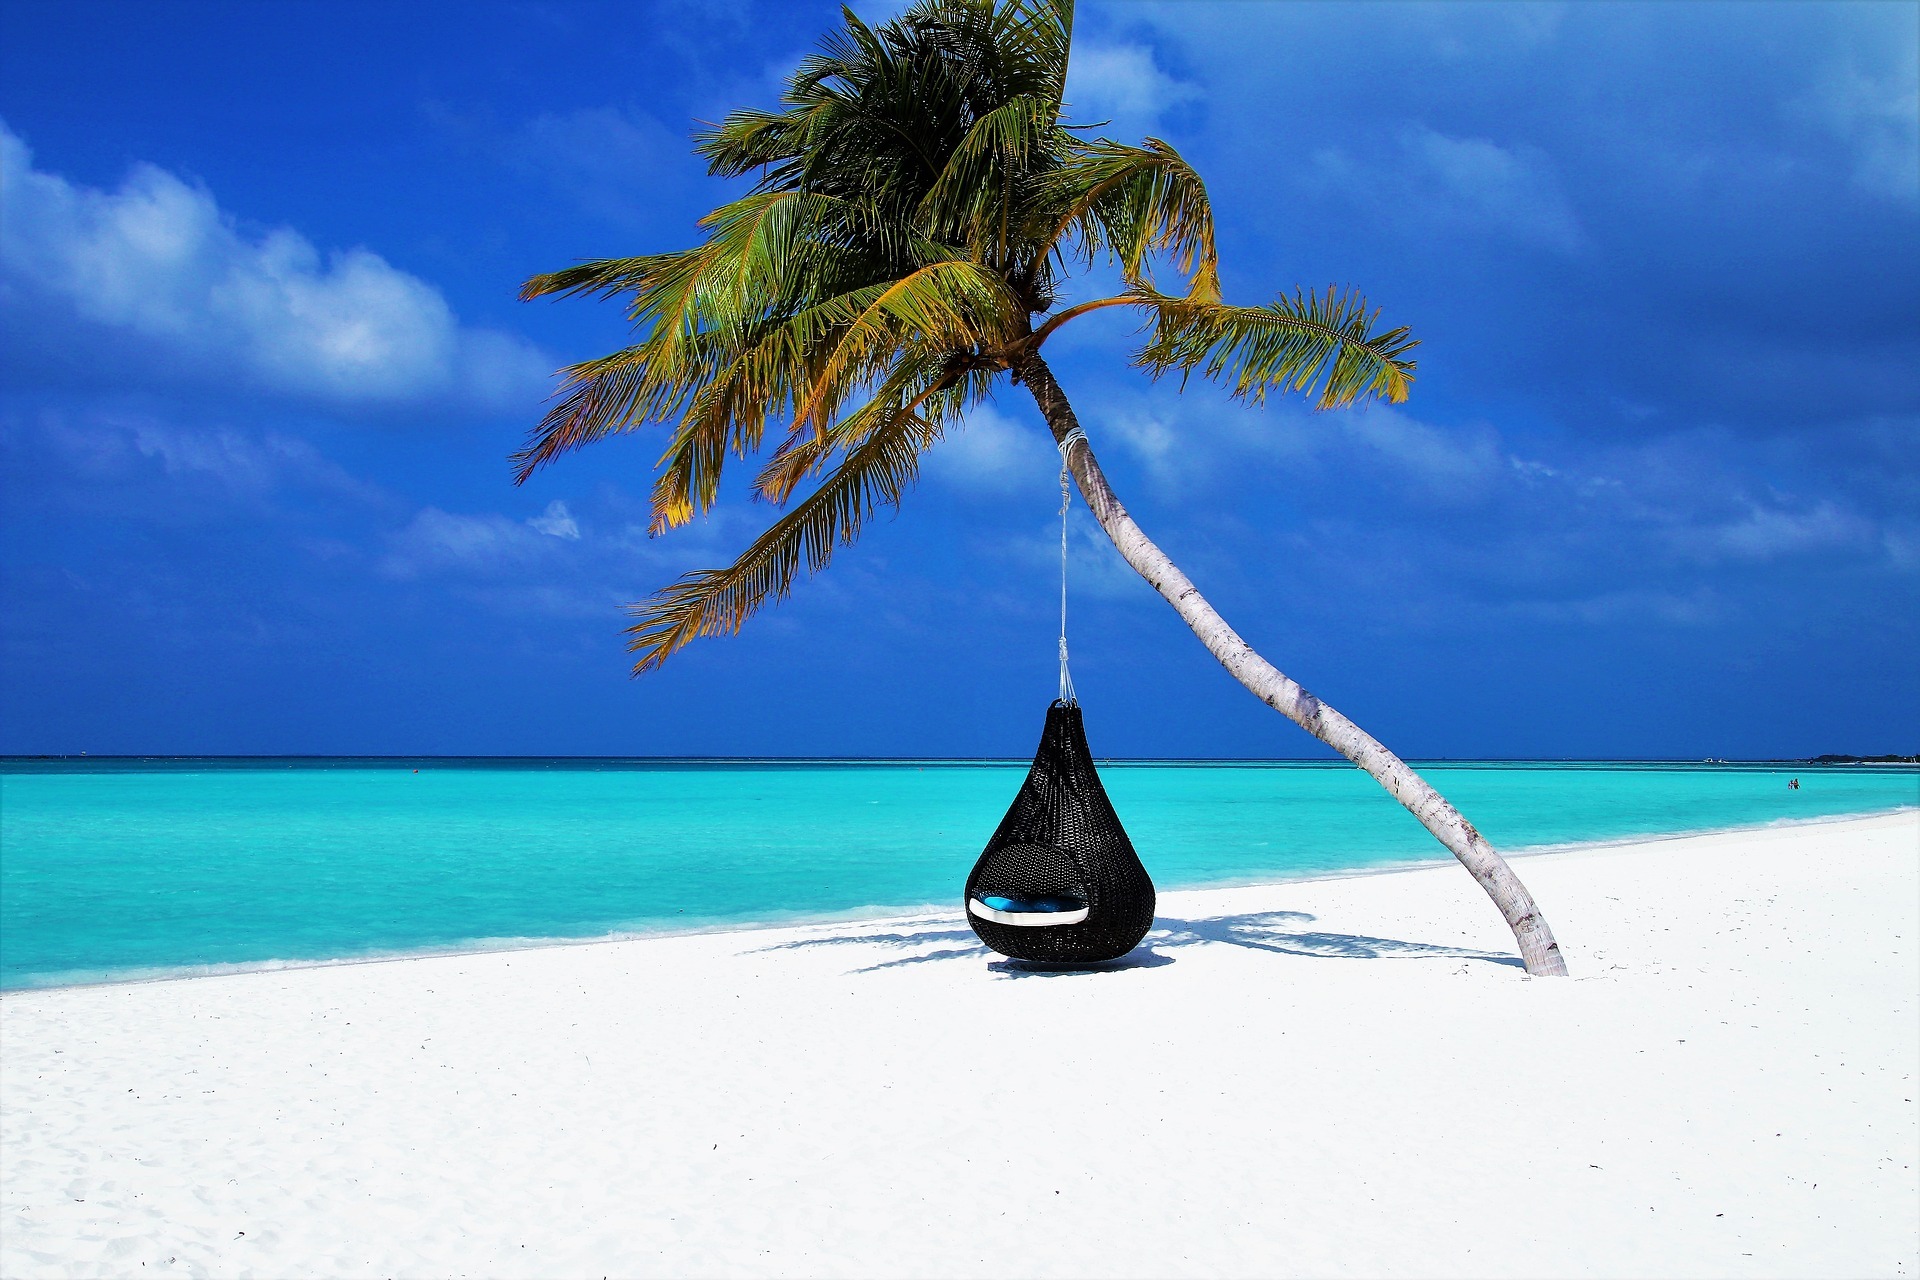 Remote islands with sandy beaches - Maldives